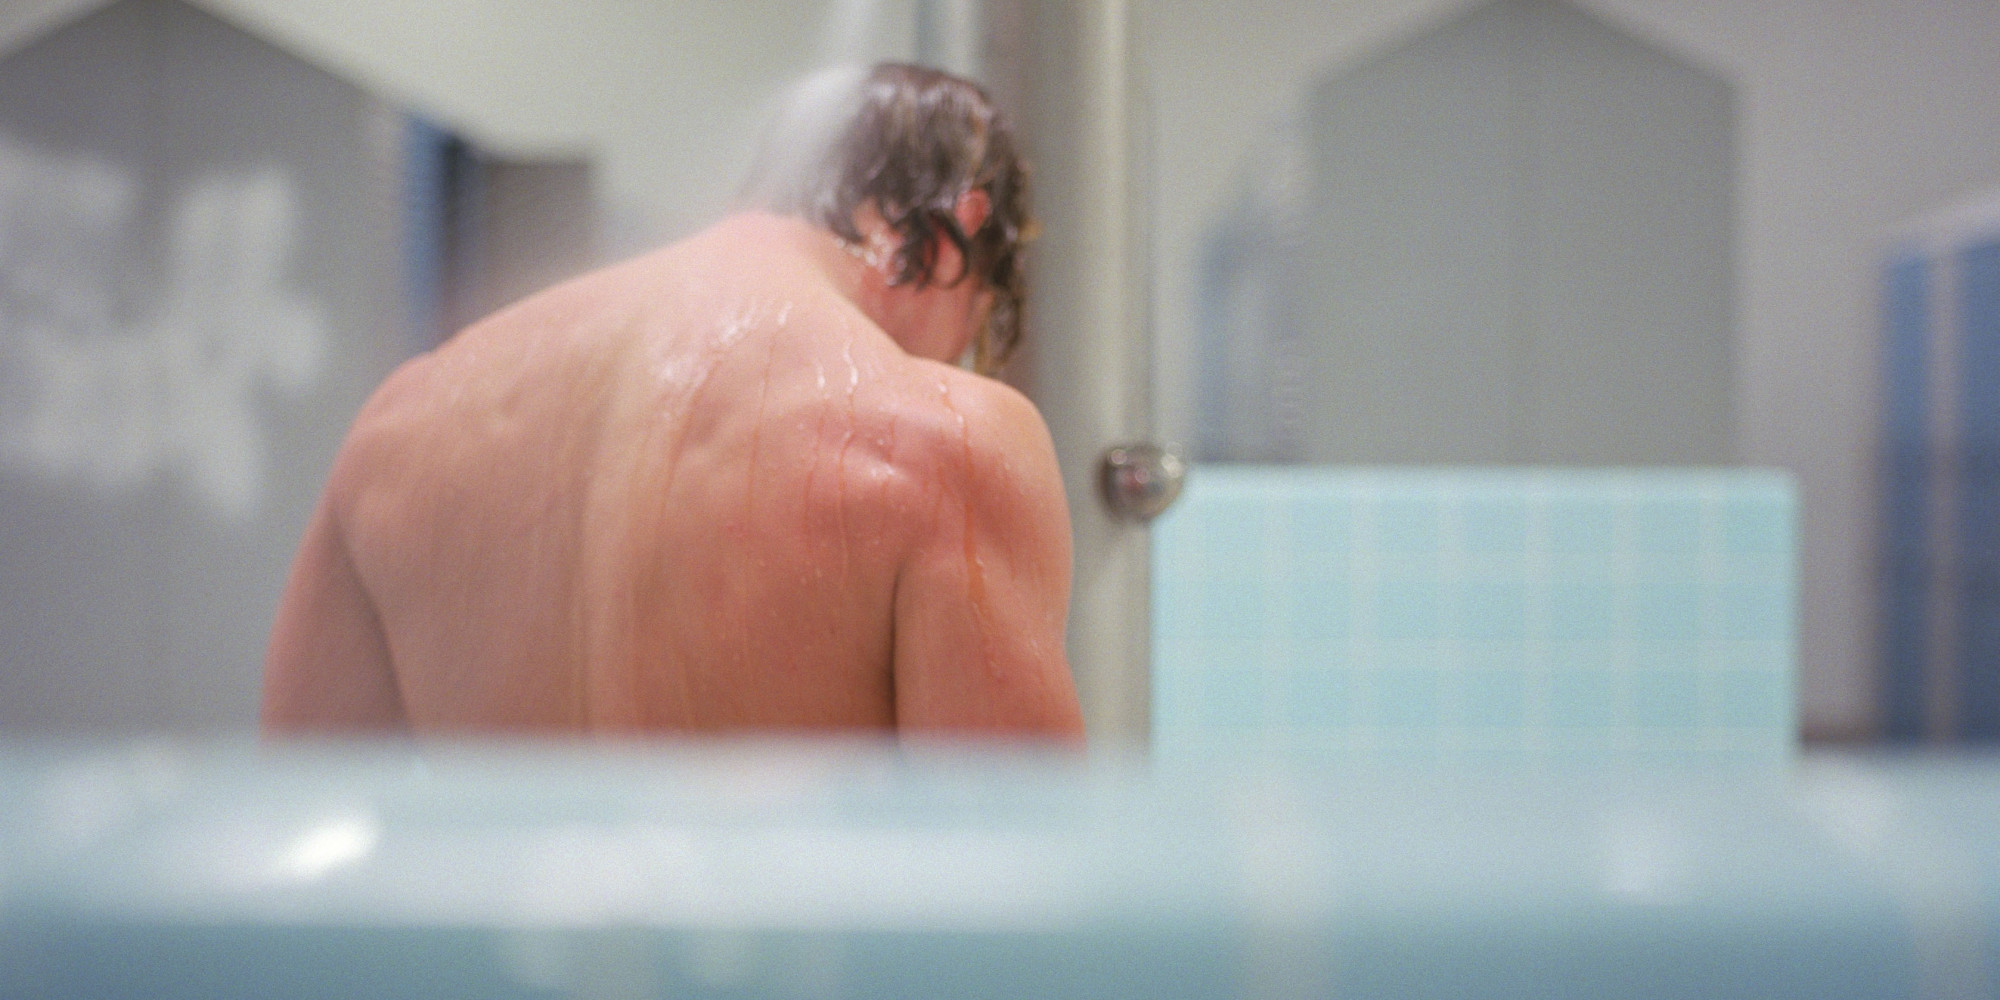 To Straight Men Showering With Gay Men: Yes, We Are Looking! (And So ...